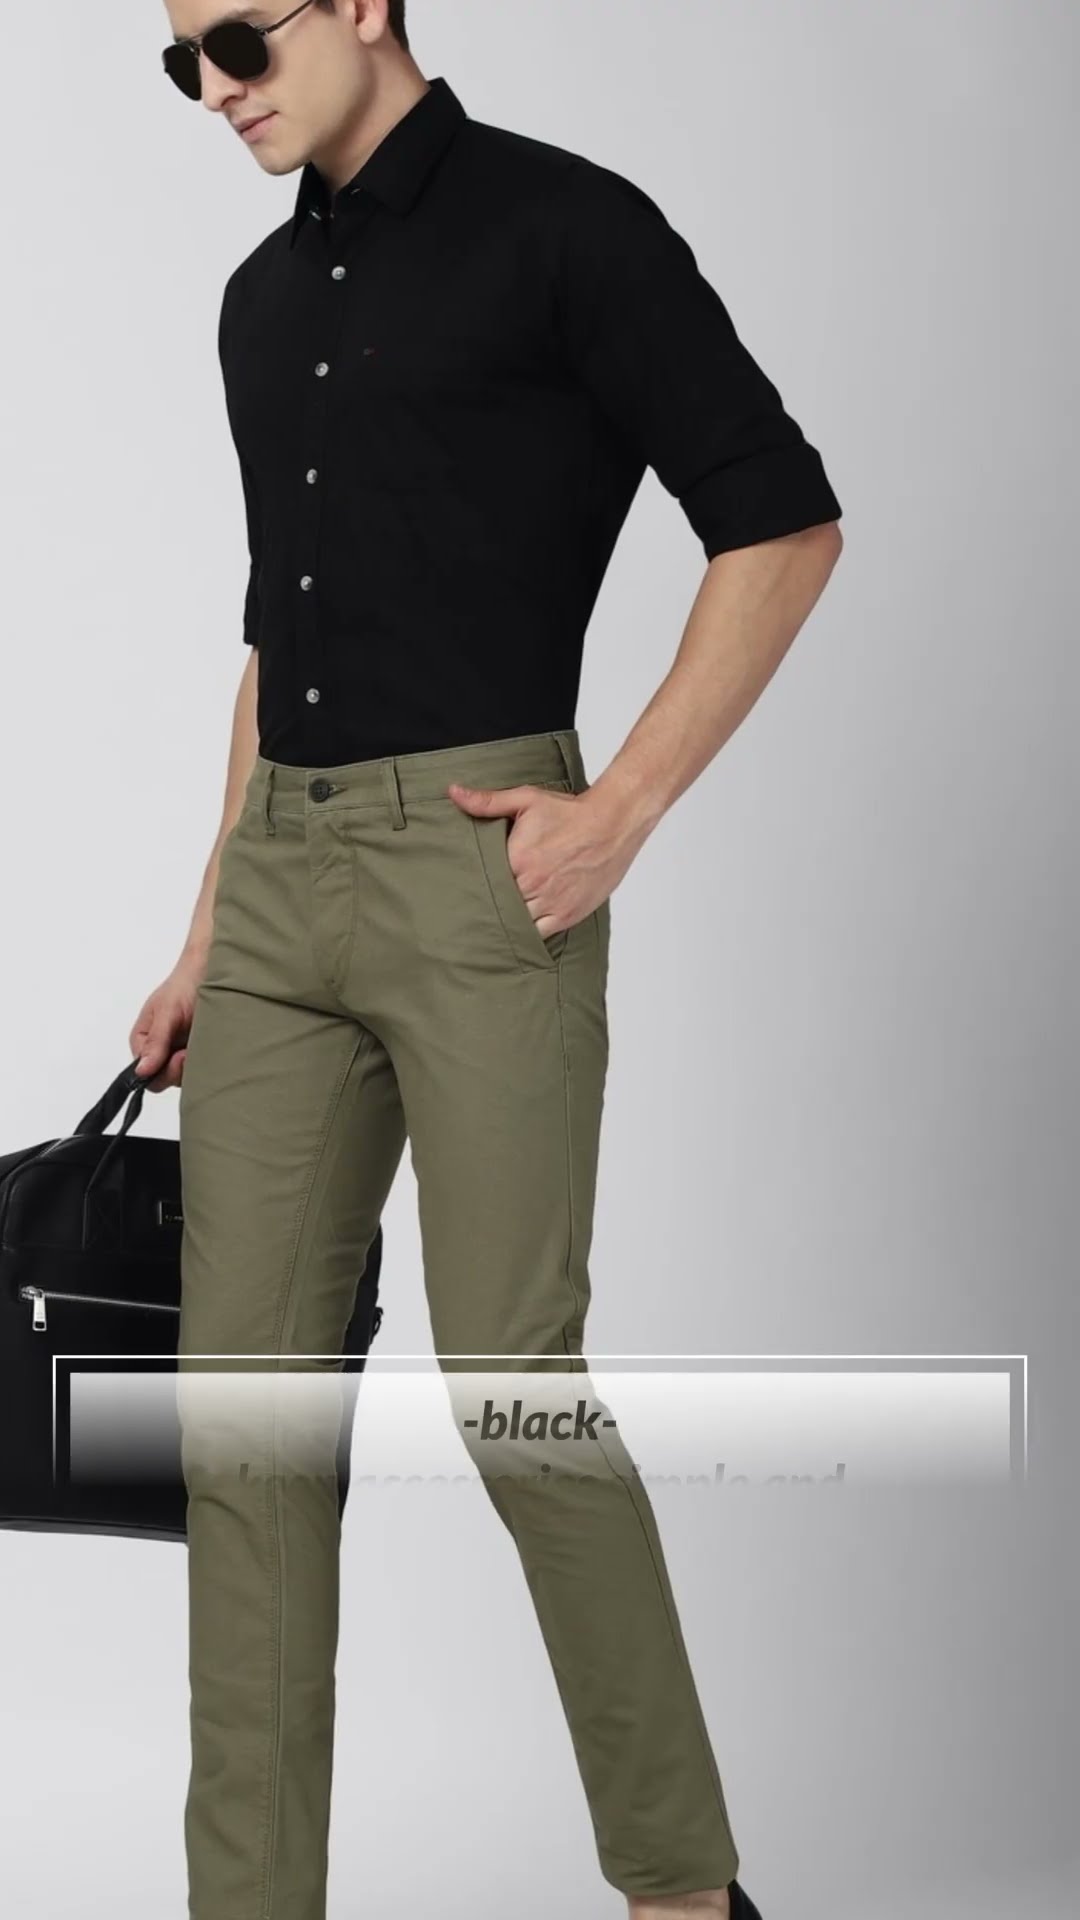 Olive Green Shirt With Matching Pants  Best Color Combination Ideas For  Men  by Look Stylish  YouTube